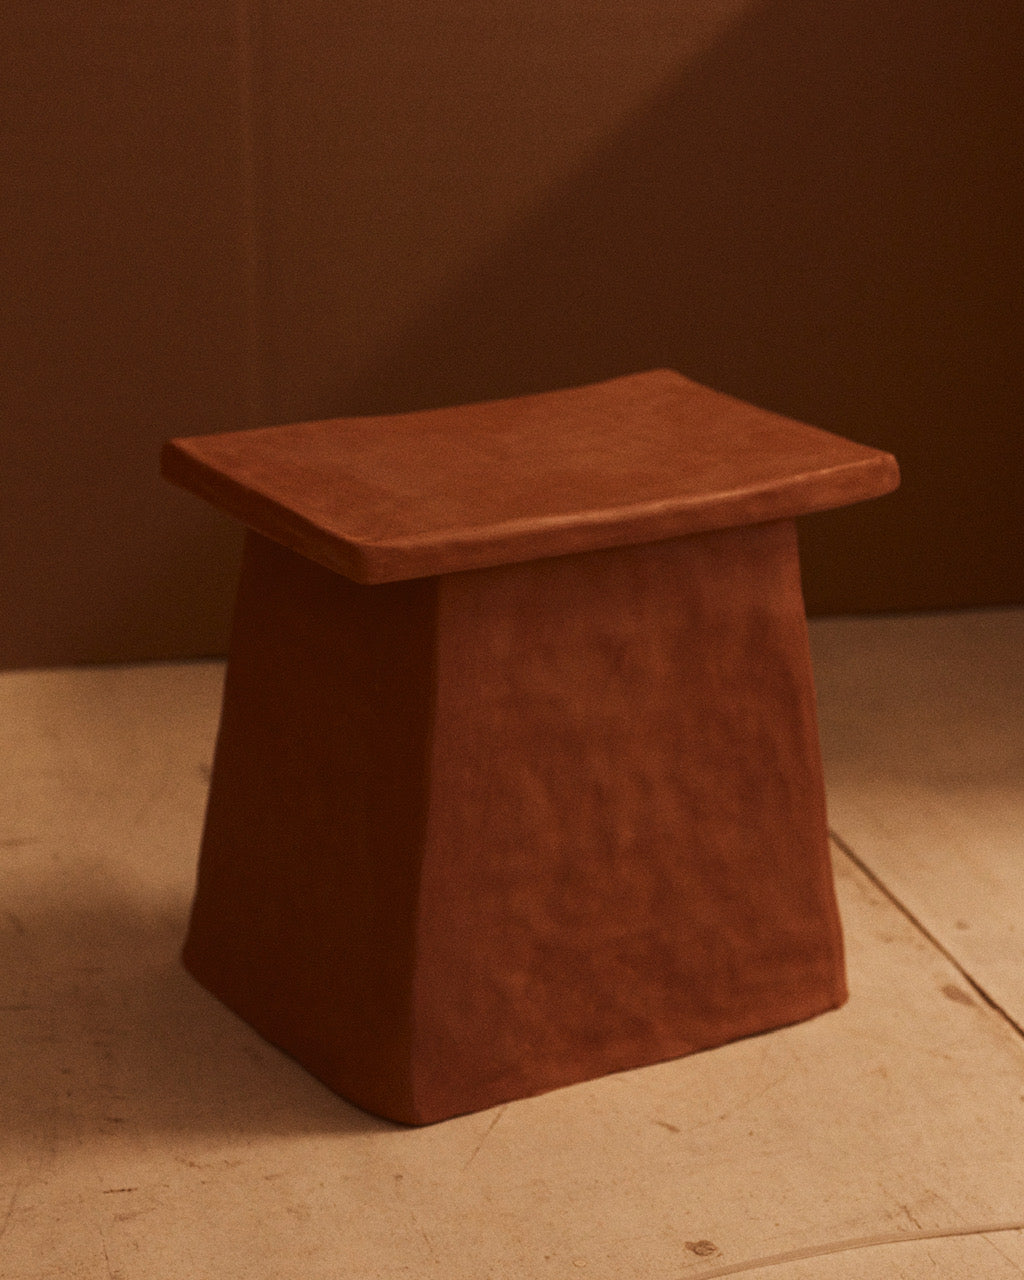 F. I. Structured Accent Table. One-of-a-kind. Angular ceramic end table with a burnished, red mud appearance in natural clay stoneware by Spanish artist Marta Bonilla.